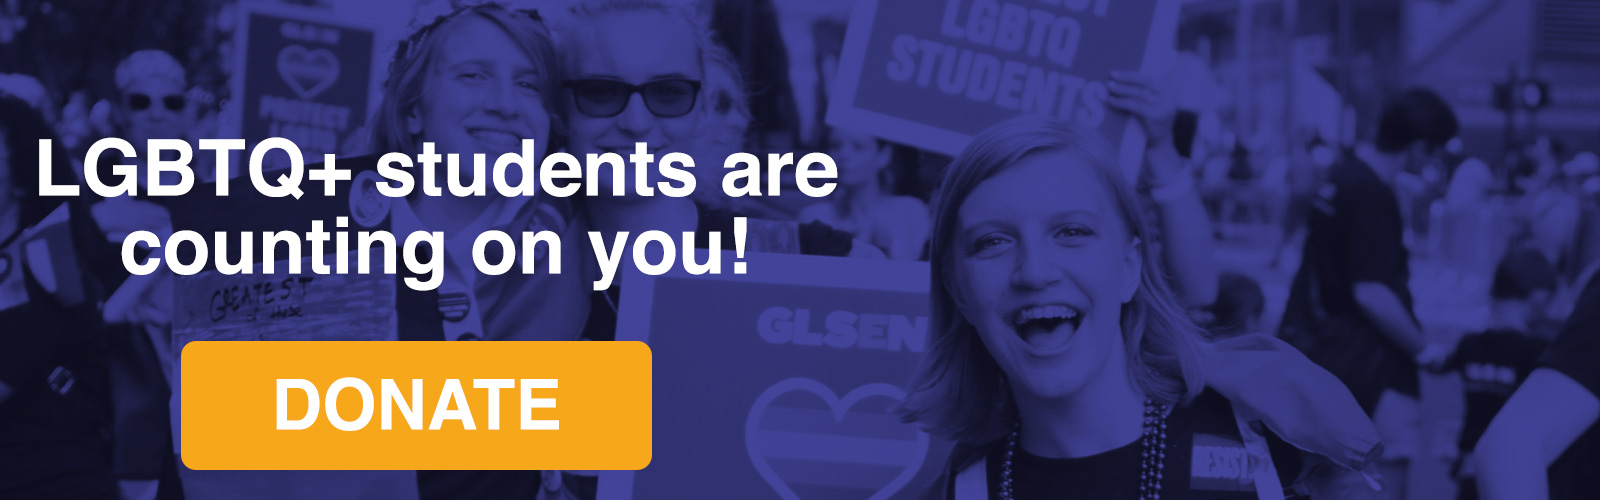 LGBTQ+ students are counting on you, donate.